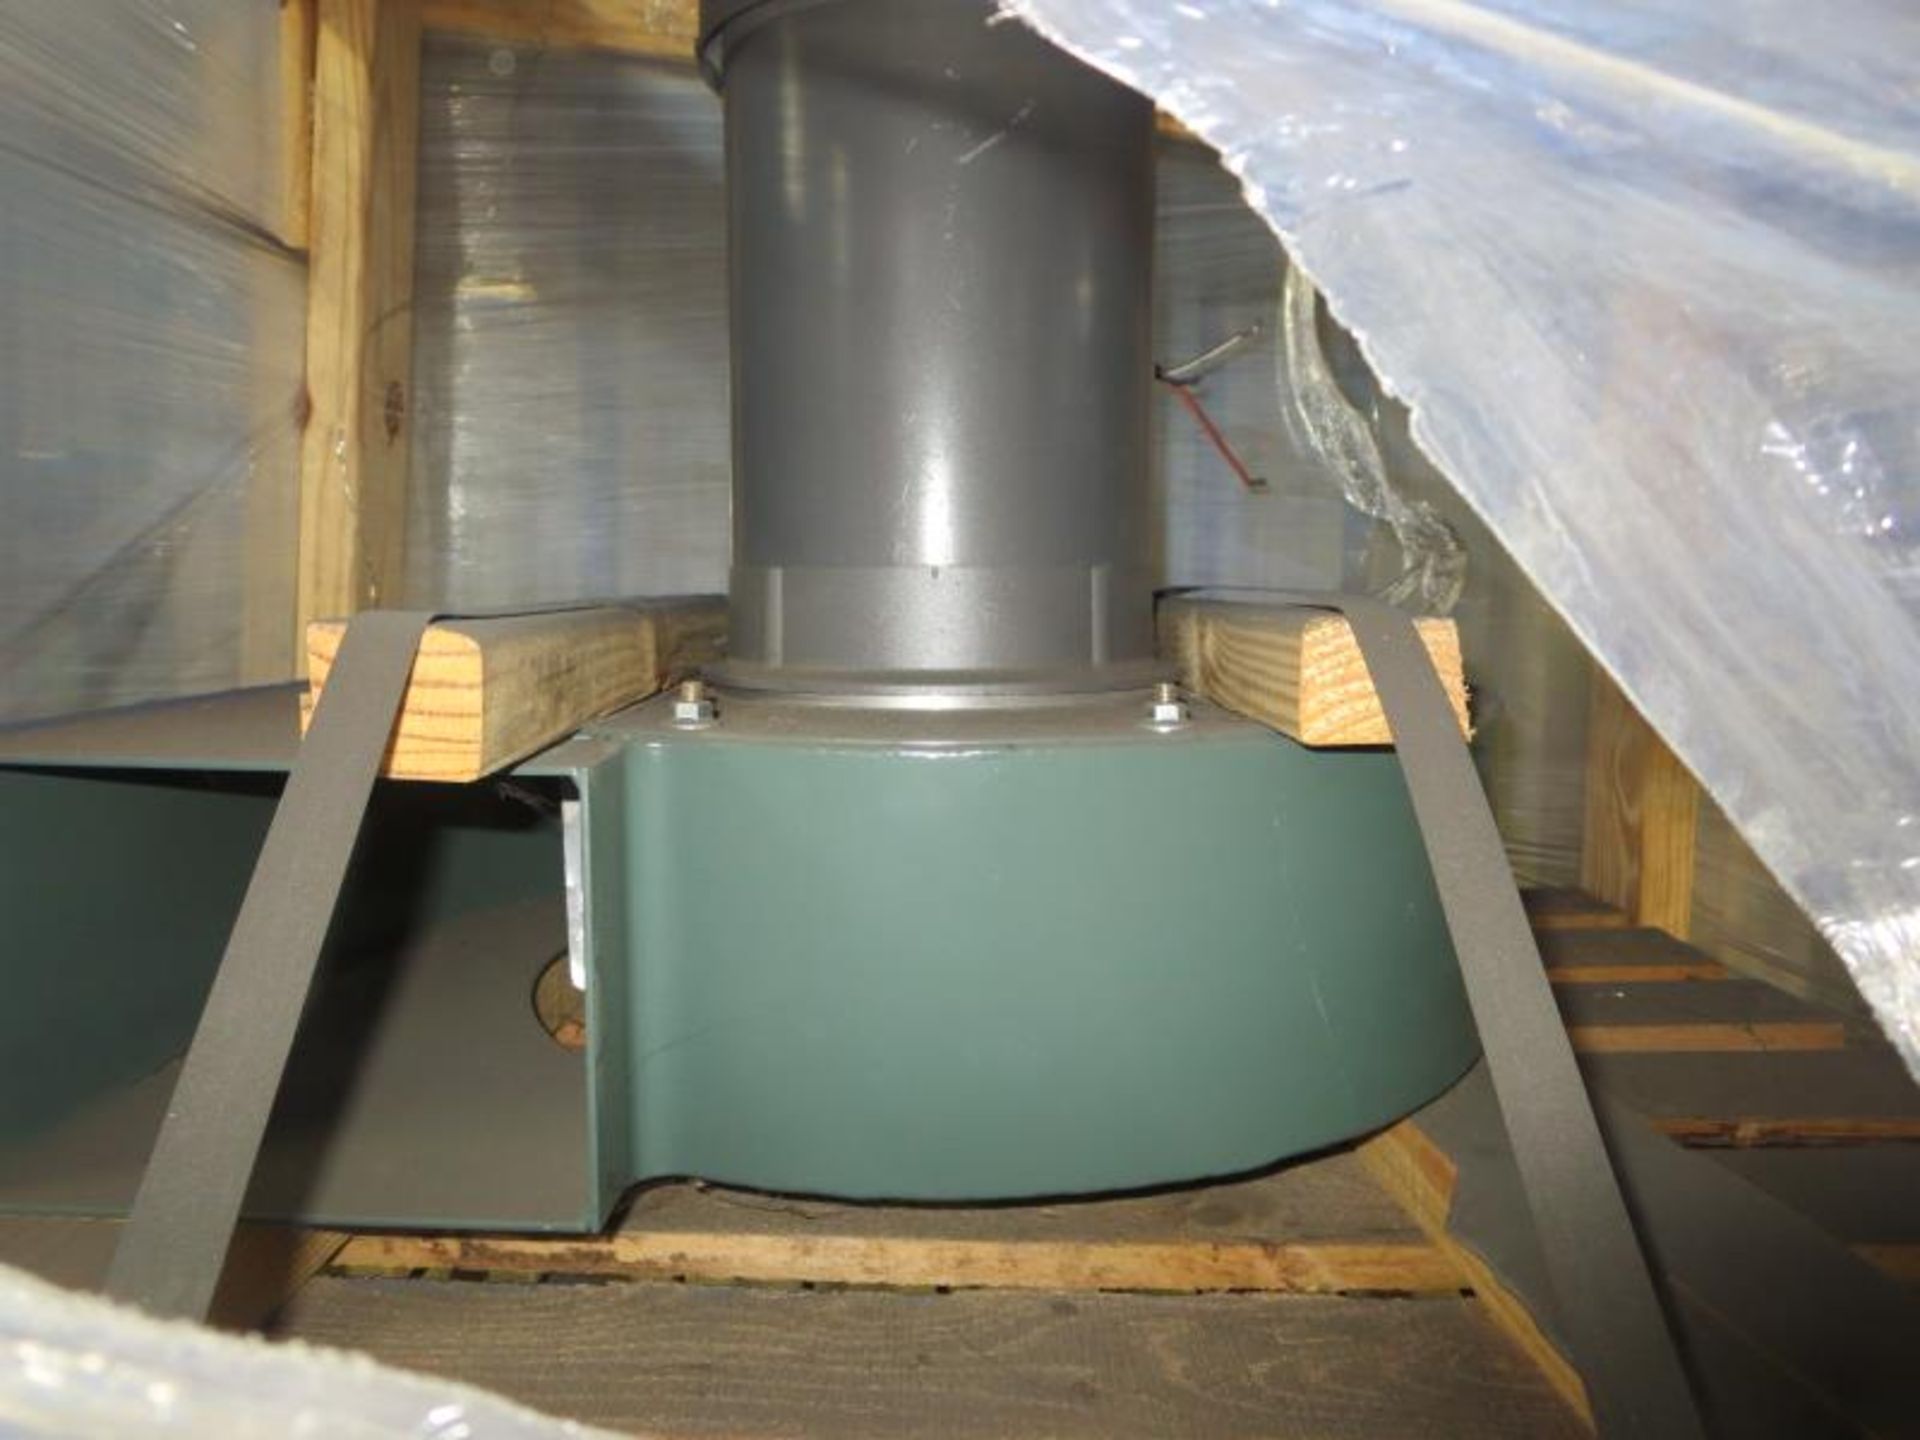 New York Blower Compact G1-ARR-4L Blower. Size 146, In original crate. Hit # 2202970. Bldg.1.8.4. - Image 2 of 3